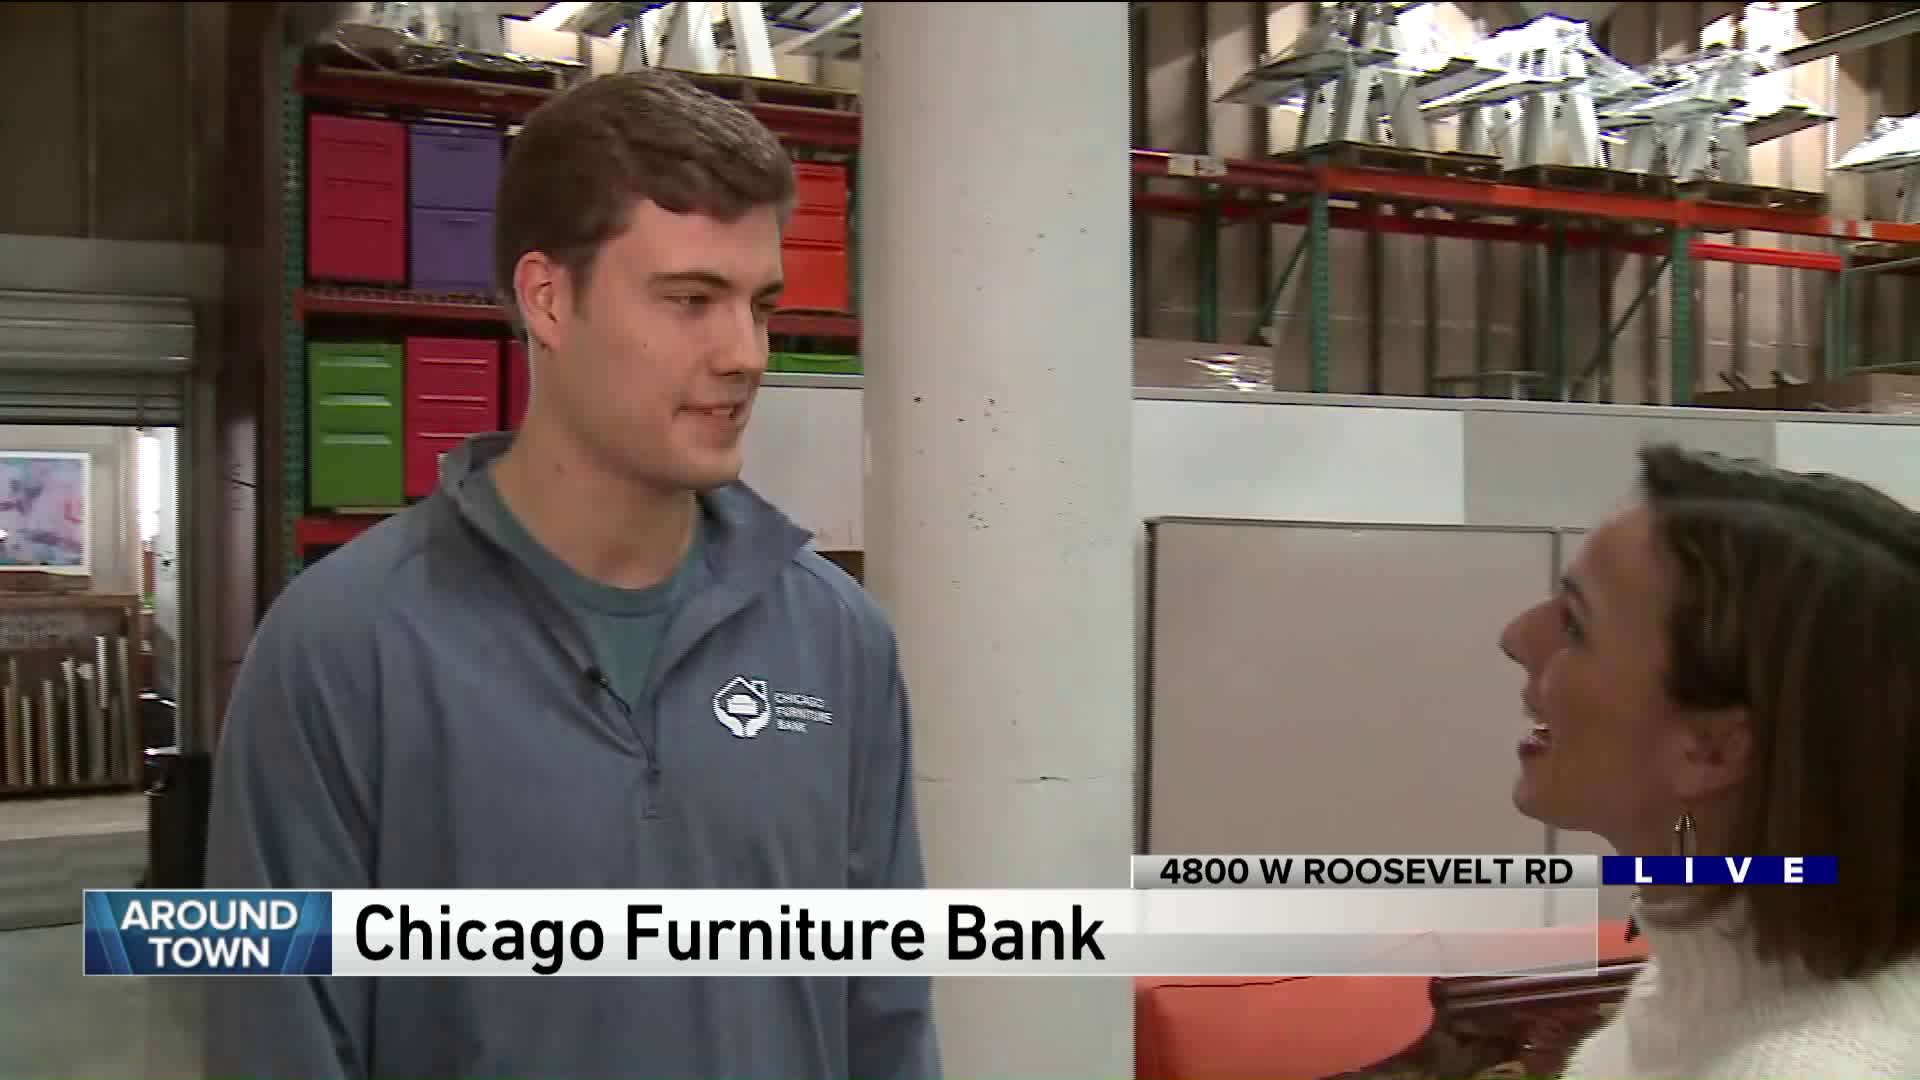 Around Town goes to the Chicago Furniture Bank for Giving Tuesday